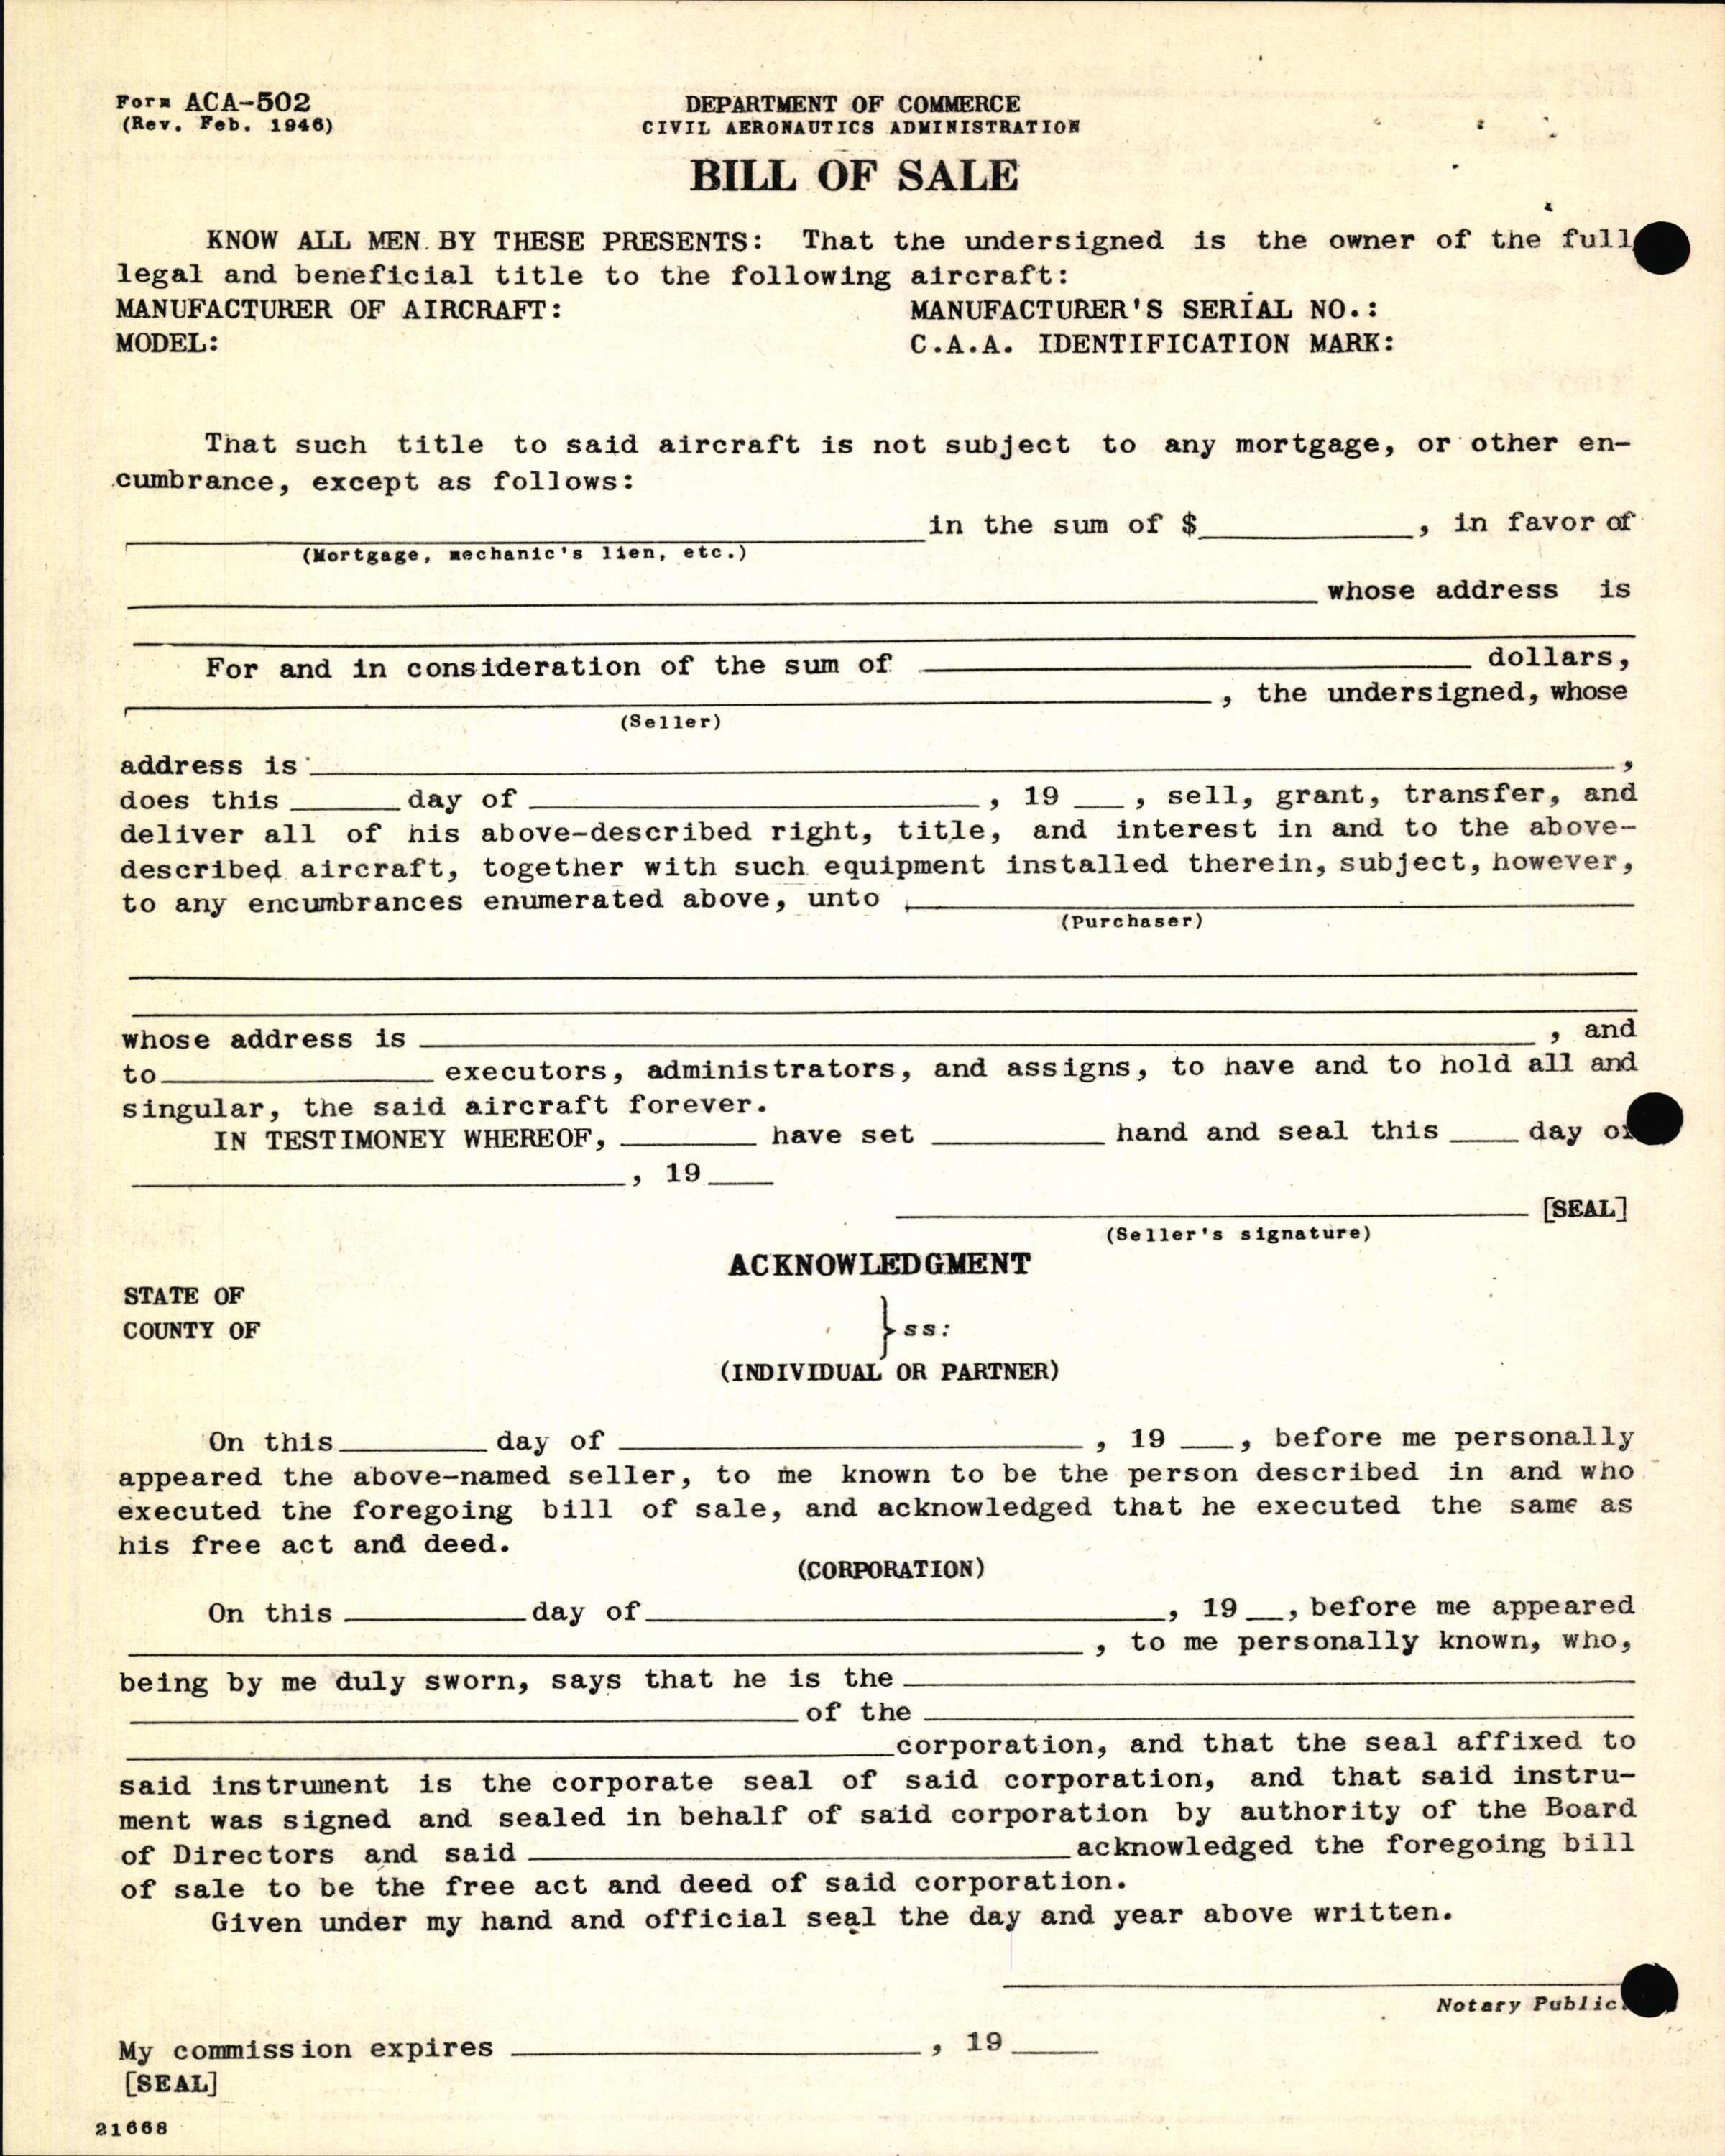 Sample page 4 from AirCorps Library document: Technical Information for Serial Number 1320